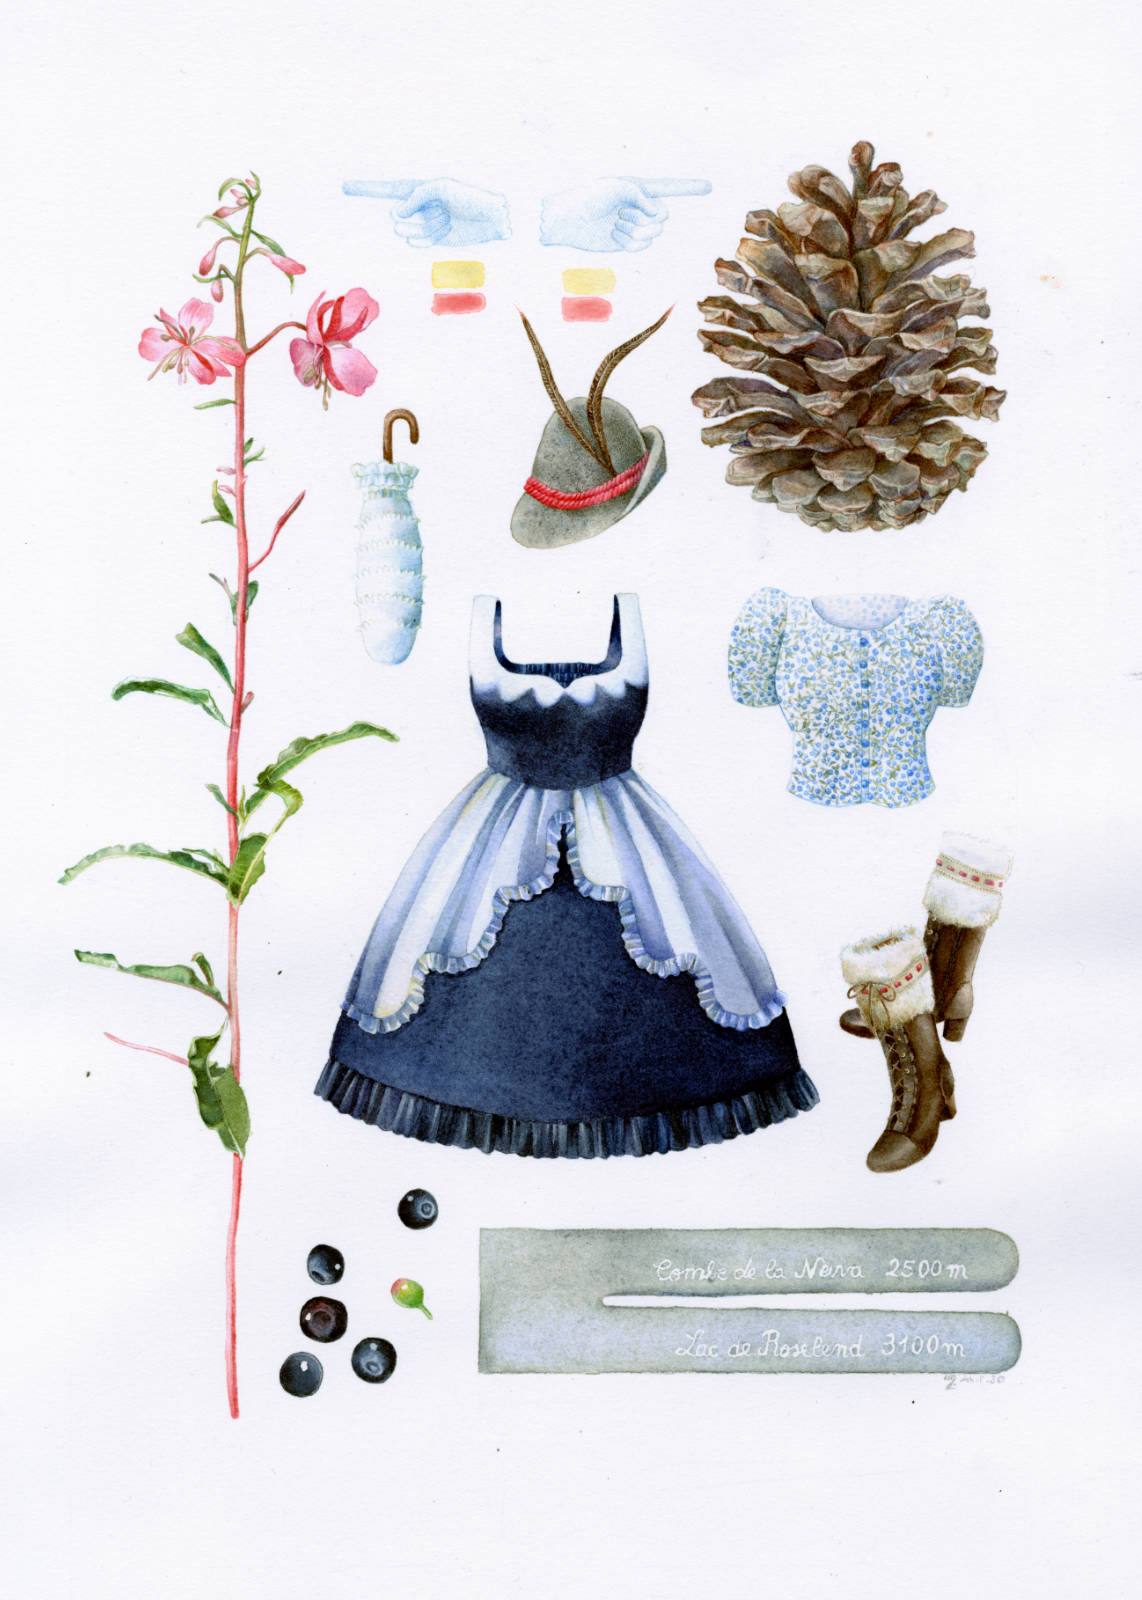 Technical illustration of a herbarium made up with fashionable lolita clothing and an alpine theme : a giant pine cone, blueberries and a blueberry print in a shirt, an austria felt hat and a pink mountain flower.